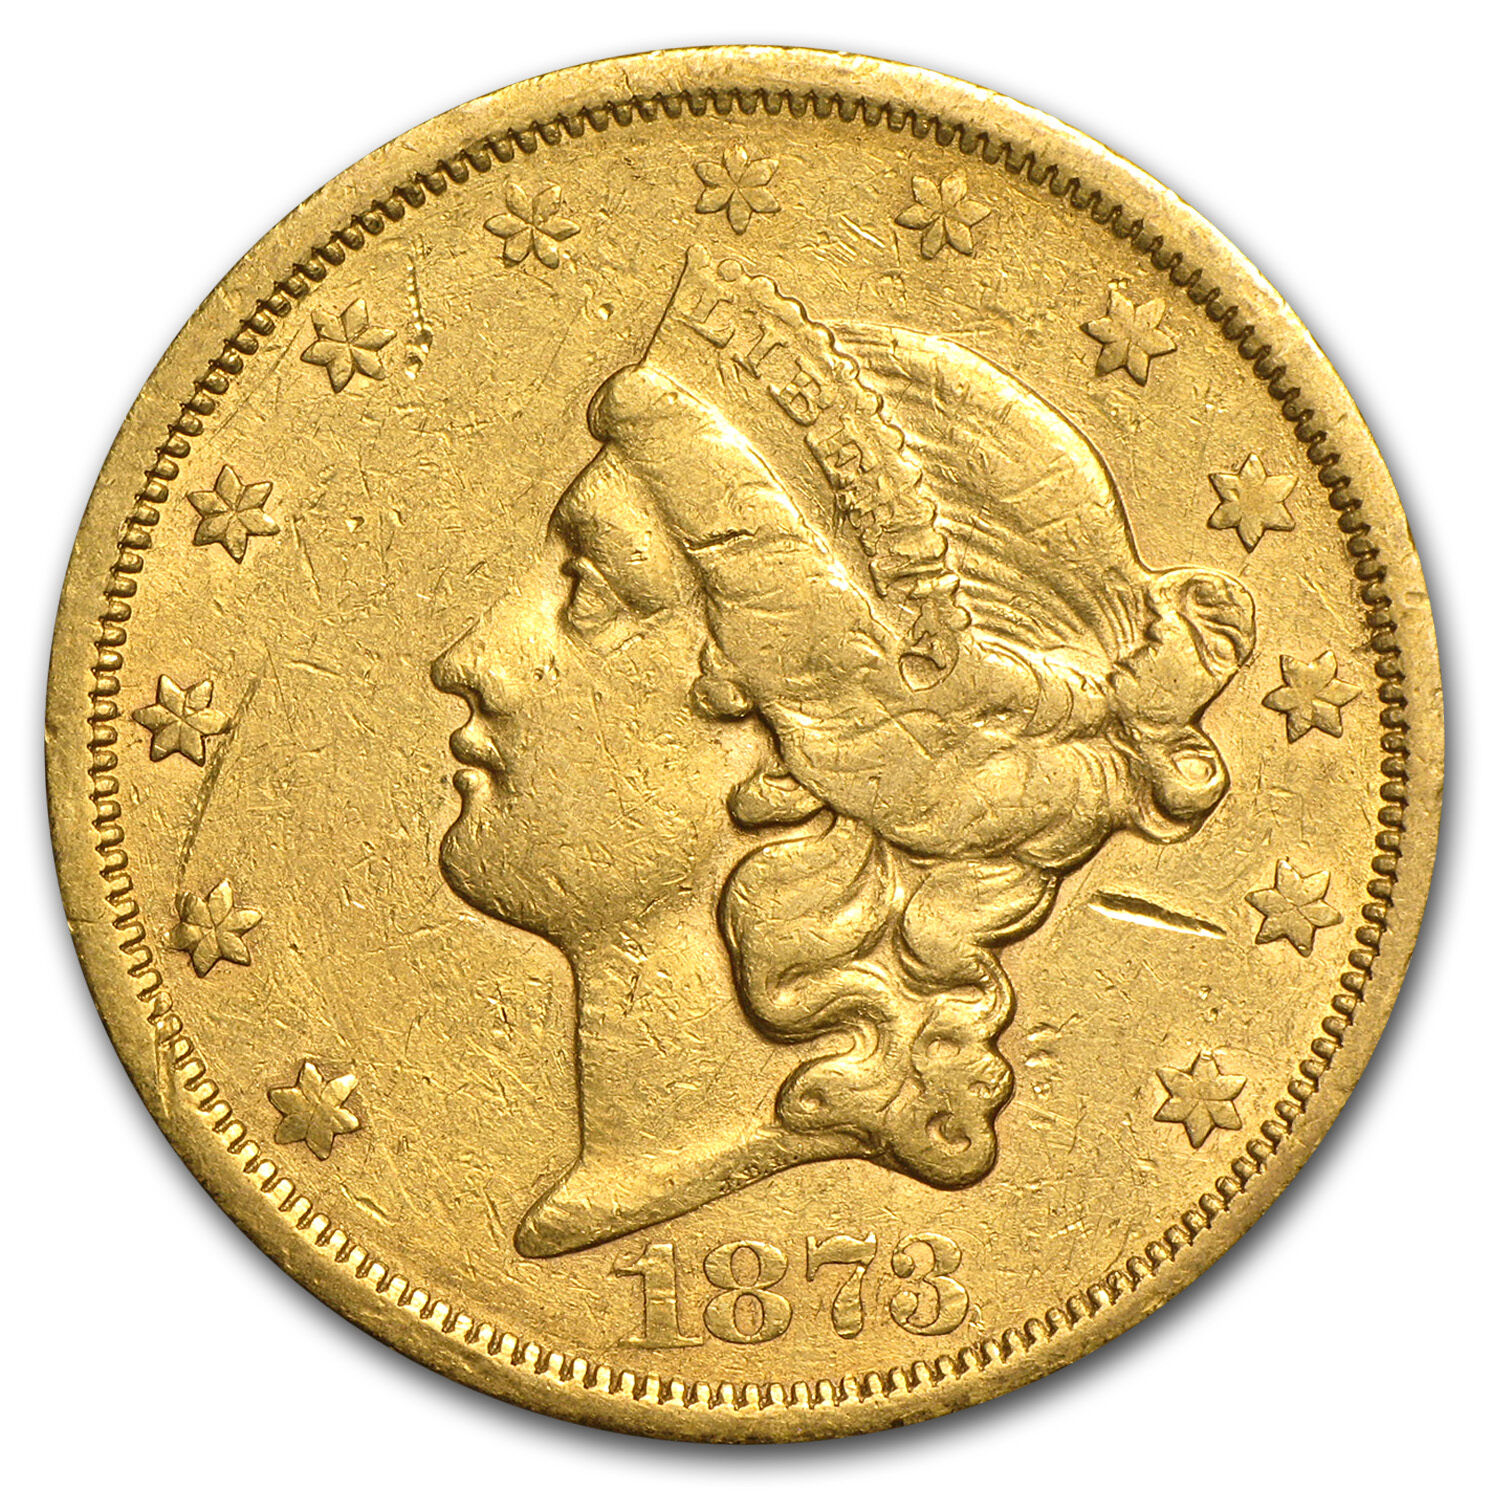 $20 Liberty Gold Double Eagle Coin - Type 2 - Random Year - Cleaned - SKU #61870